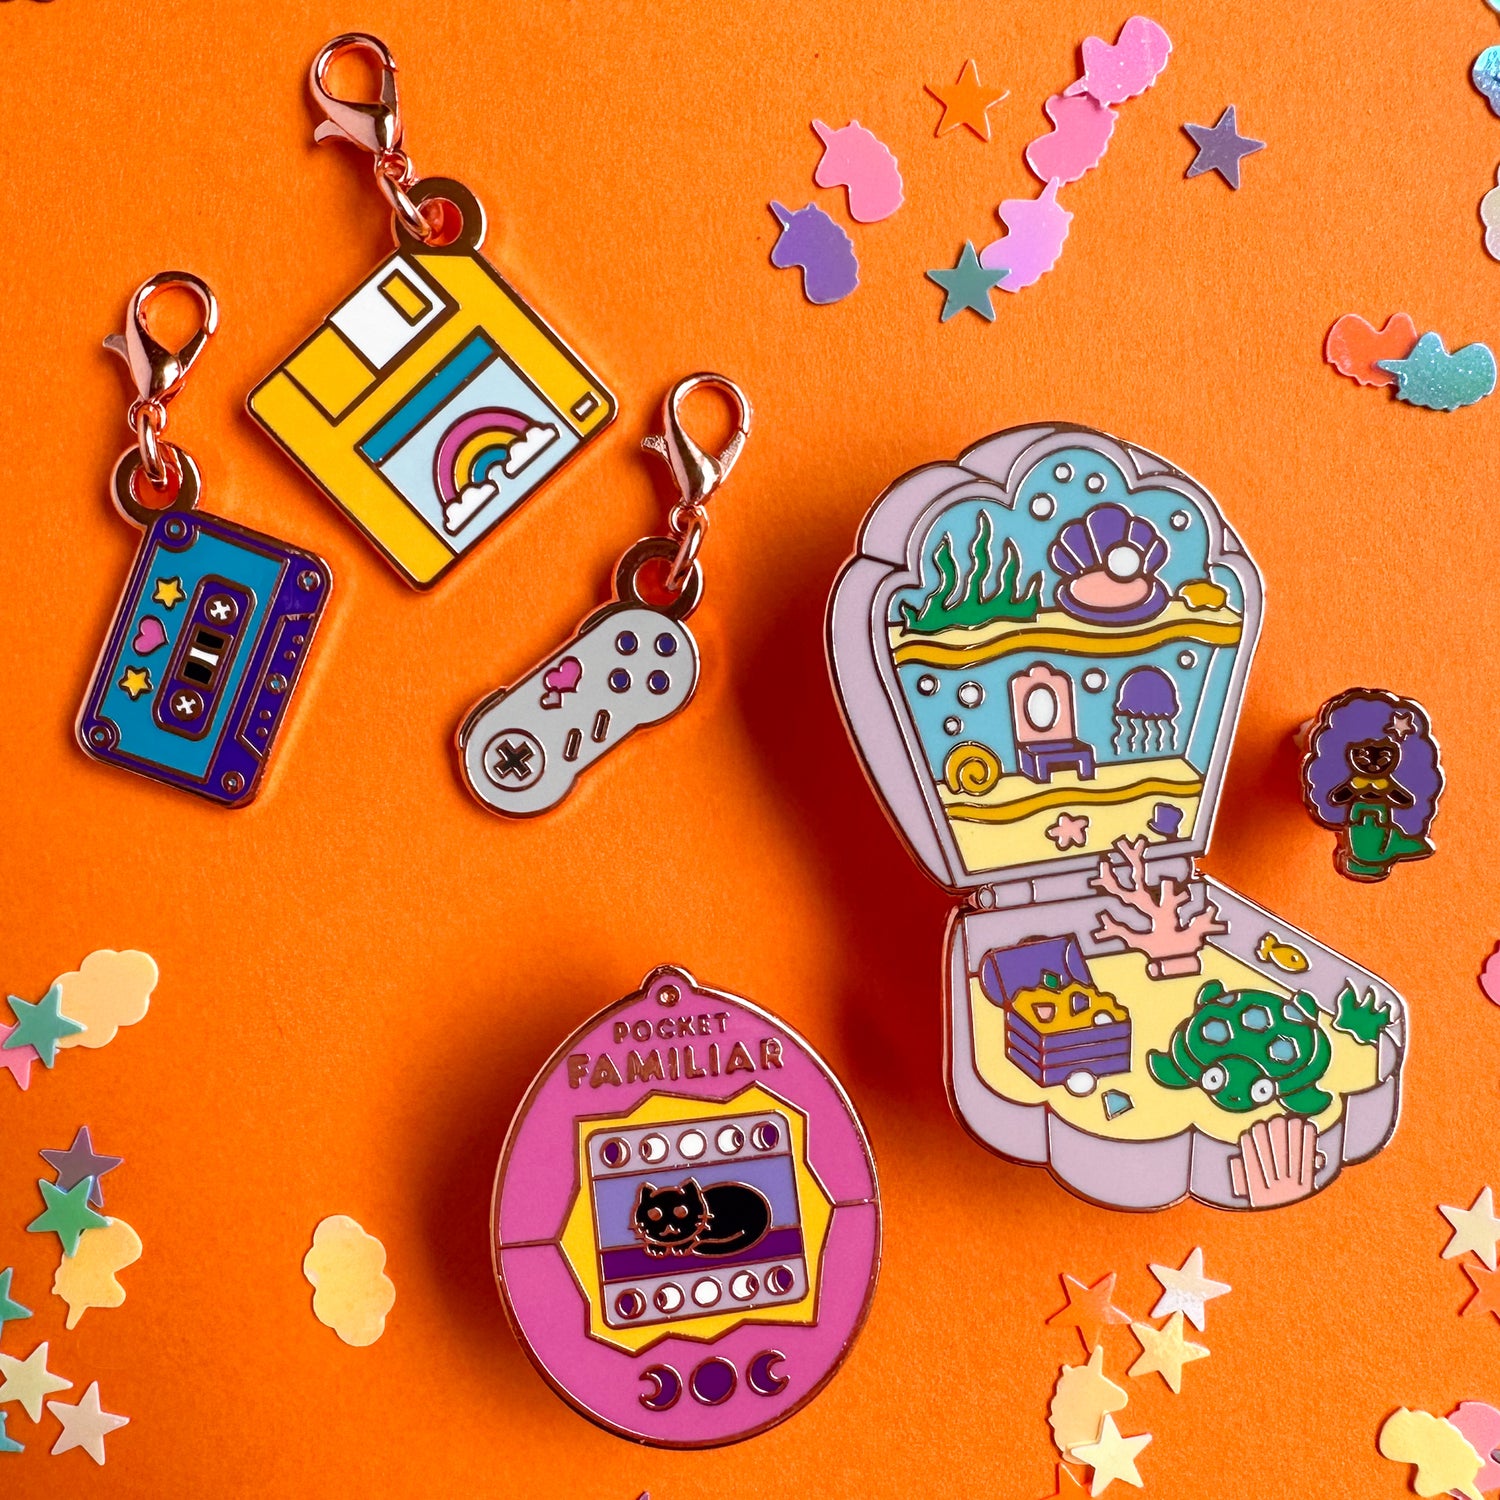 An enamel pin shaped like a vitural pet, a Polly Pocket like mermaid toy set, and 4 charms shaped like a Gameboy, cassette tape, floppy disk, and a Super Nintendo controller all on an orange confetti background.